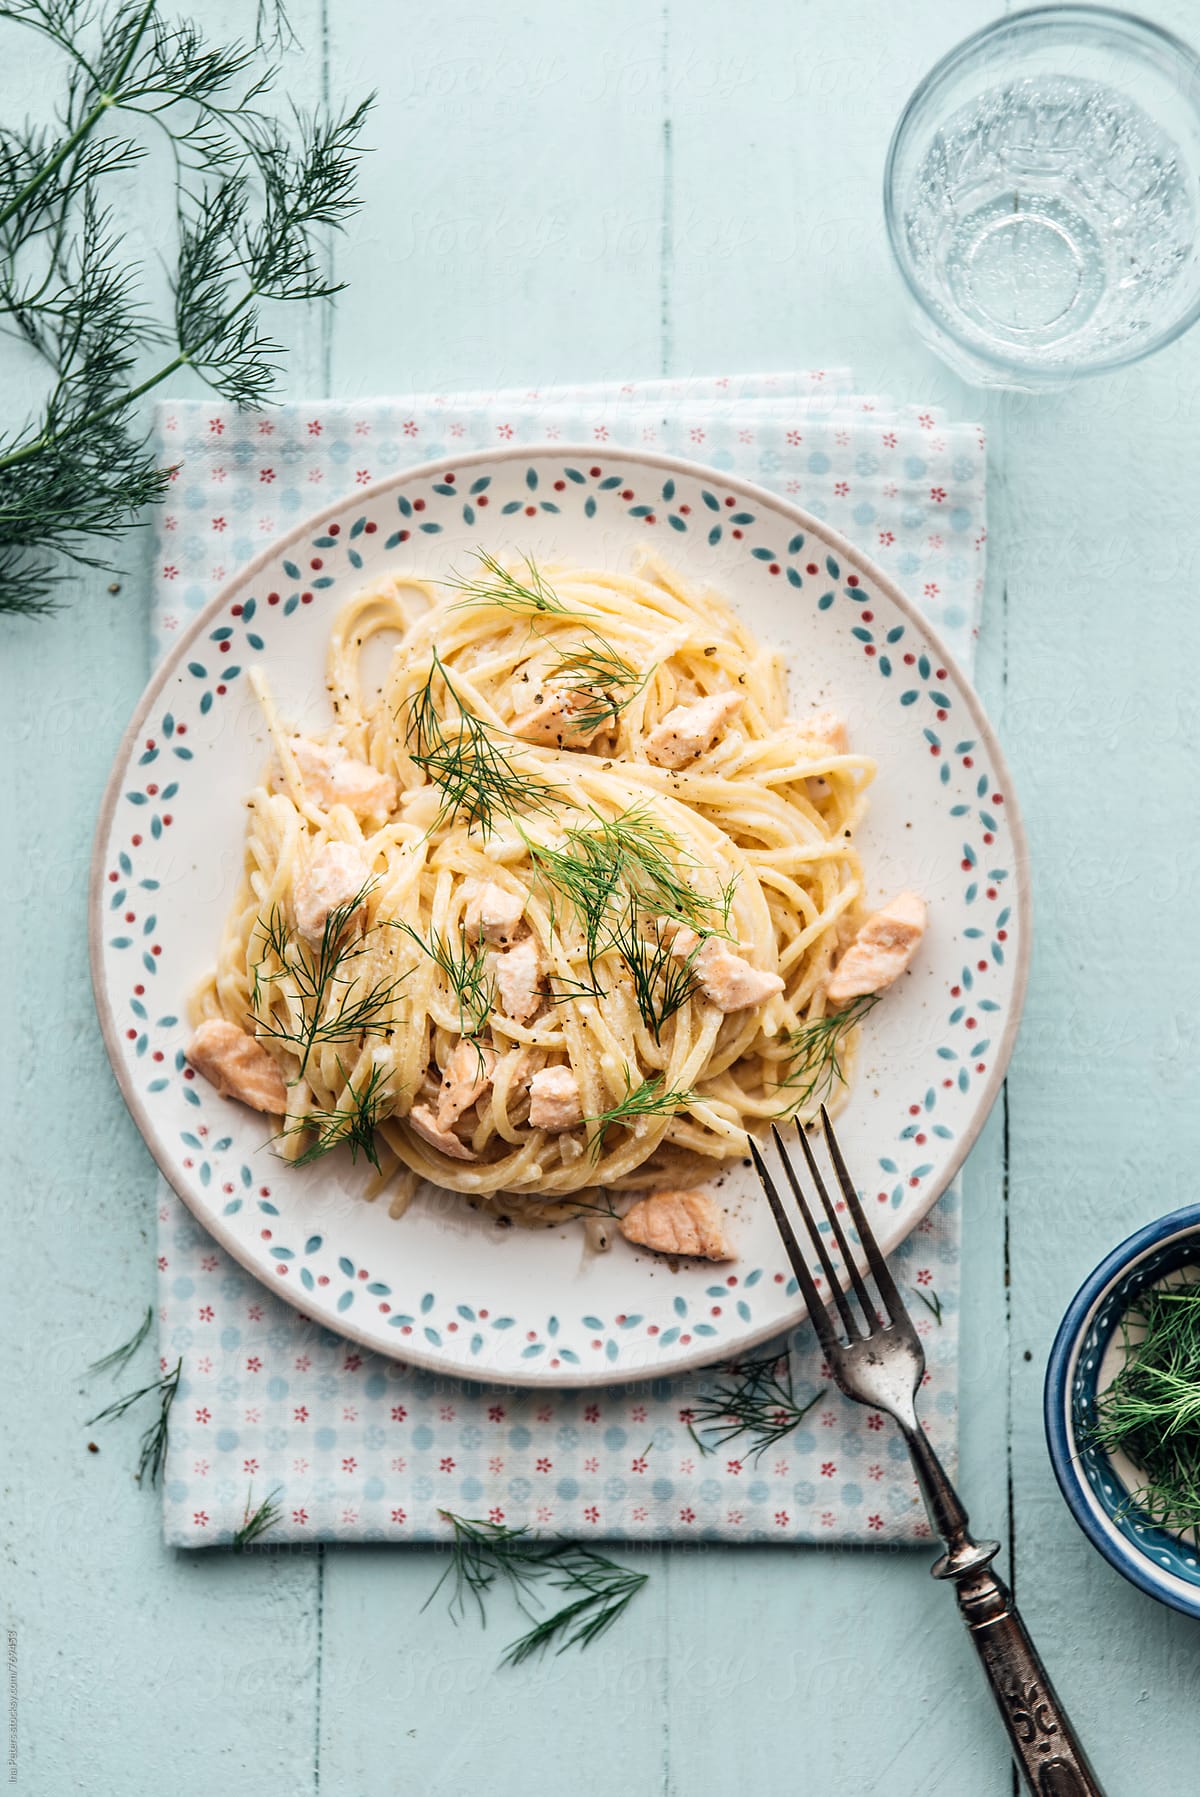 Food: Spaghetti with Salmon white wine cream sauce and dill